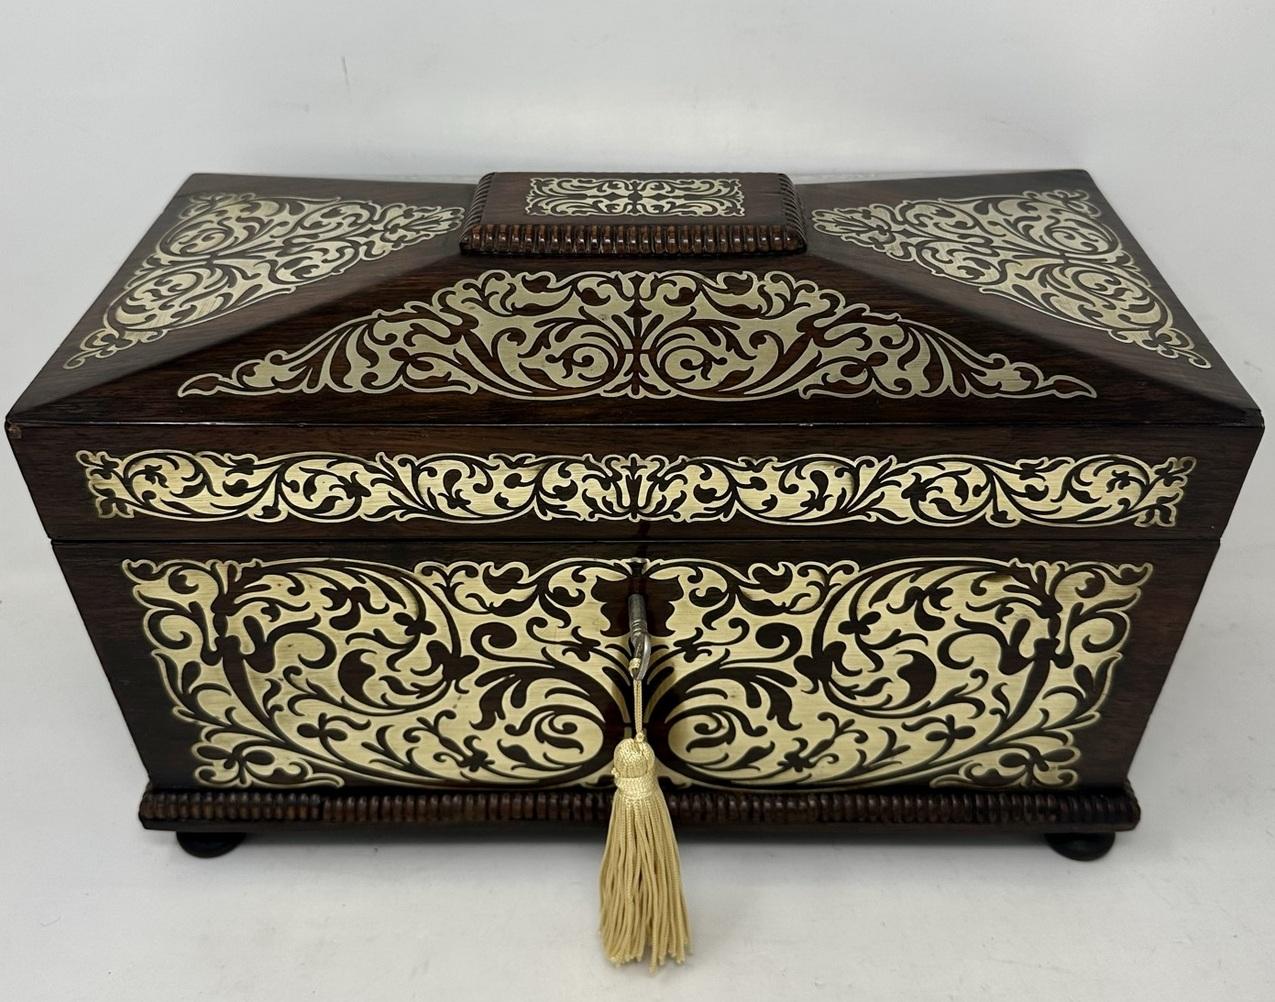 Superb example of an English Regency Rosewood Double Tea Caddy of traditional sarcophagus outline and unusually large size, with lavish brass inlay decoration. The dome shaped hinged lid enclosing a complete original fitted interior, including a